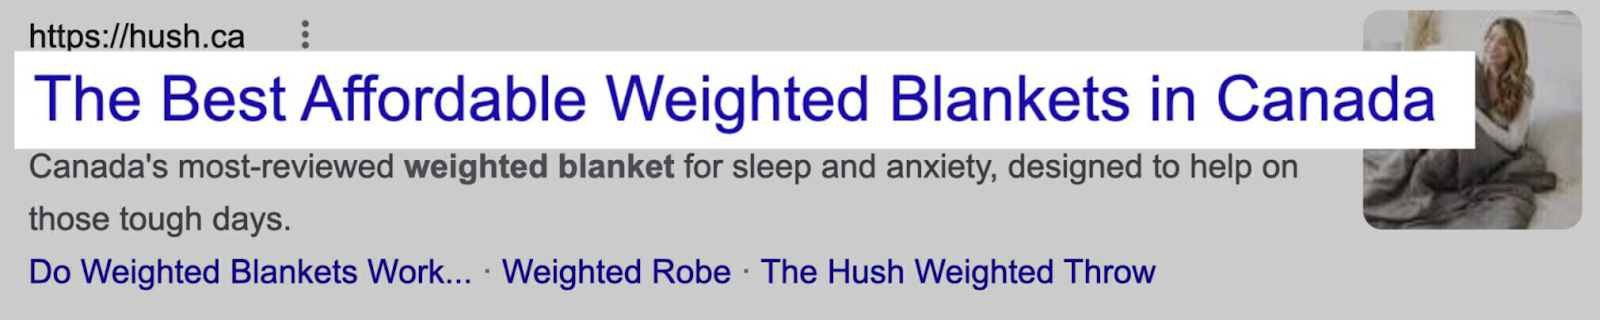 "The Best Affordable Weighted Blankets in Canada" title tag on Google